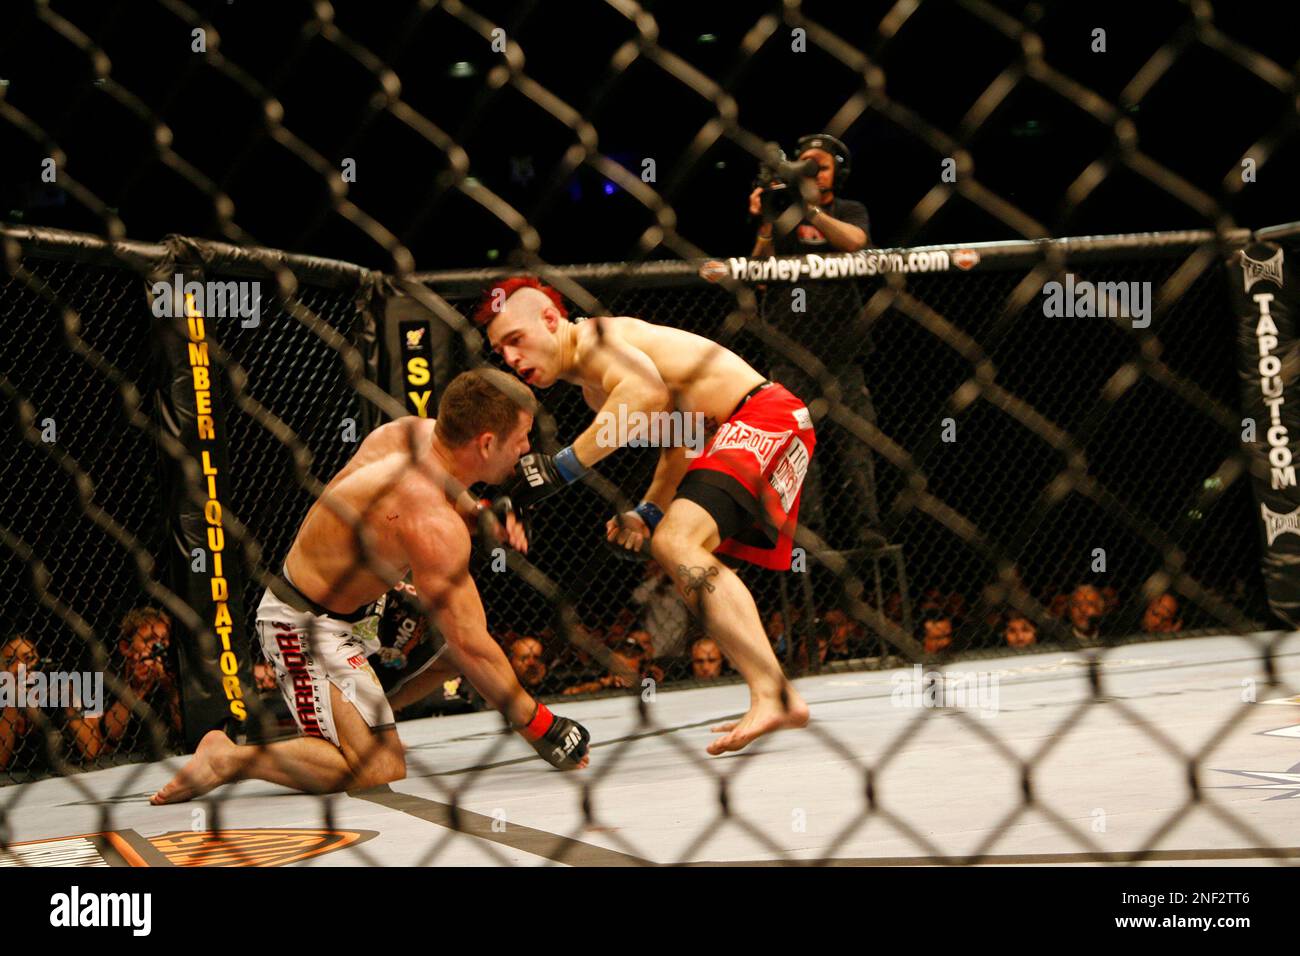 Dan Hardy, right, of England, fights U.S. Marcus Davis, of Bangor, Maine, during their Ultimate Fighting Championship bout in Cologne, Germany, on Saturday, June 13, 2009. The Ultimate Fighting Championship UFC is the world leading professional mixed martial arts MMA organization. **Eds Note: German spelling of Cologne is Koeln** (AP Photo/Hermann J. Knippertz) Stock Photo